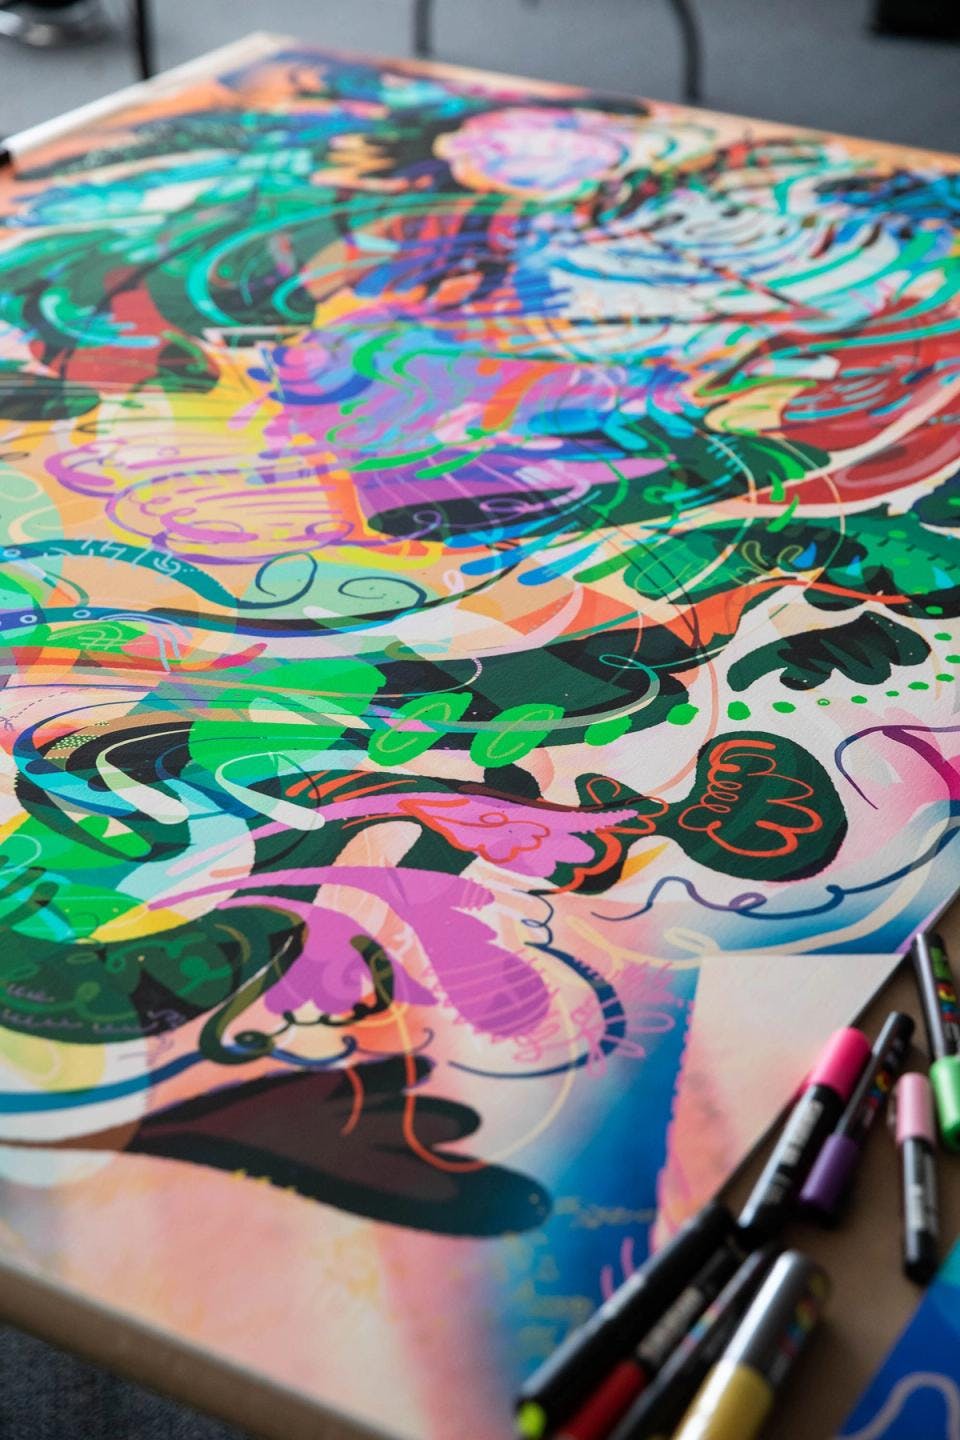 A close-up of one of Moses Sun's colorful abstract painting as it rests on a worktable.